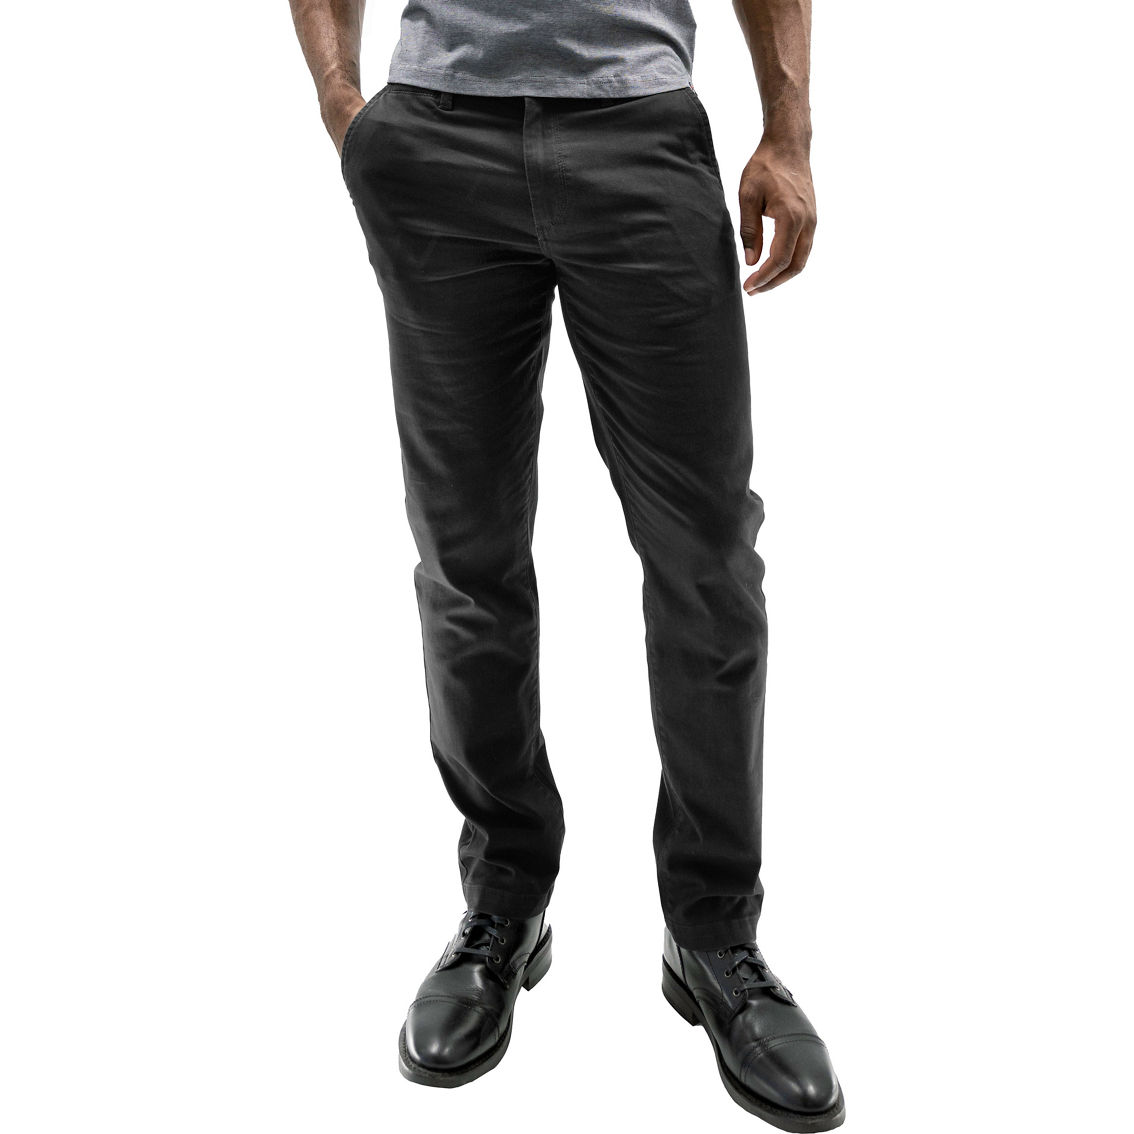 Devil Dog Chino Pants | Pants | Clothing & Accessories | Shop The Exchange